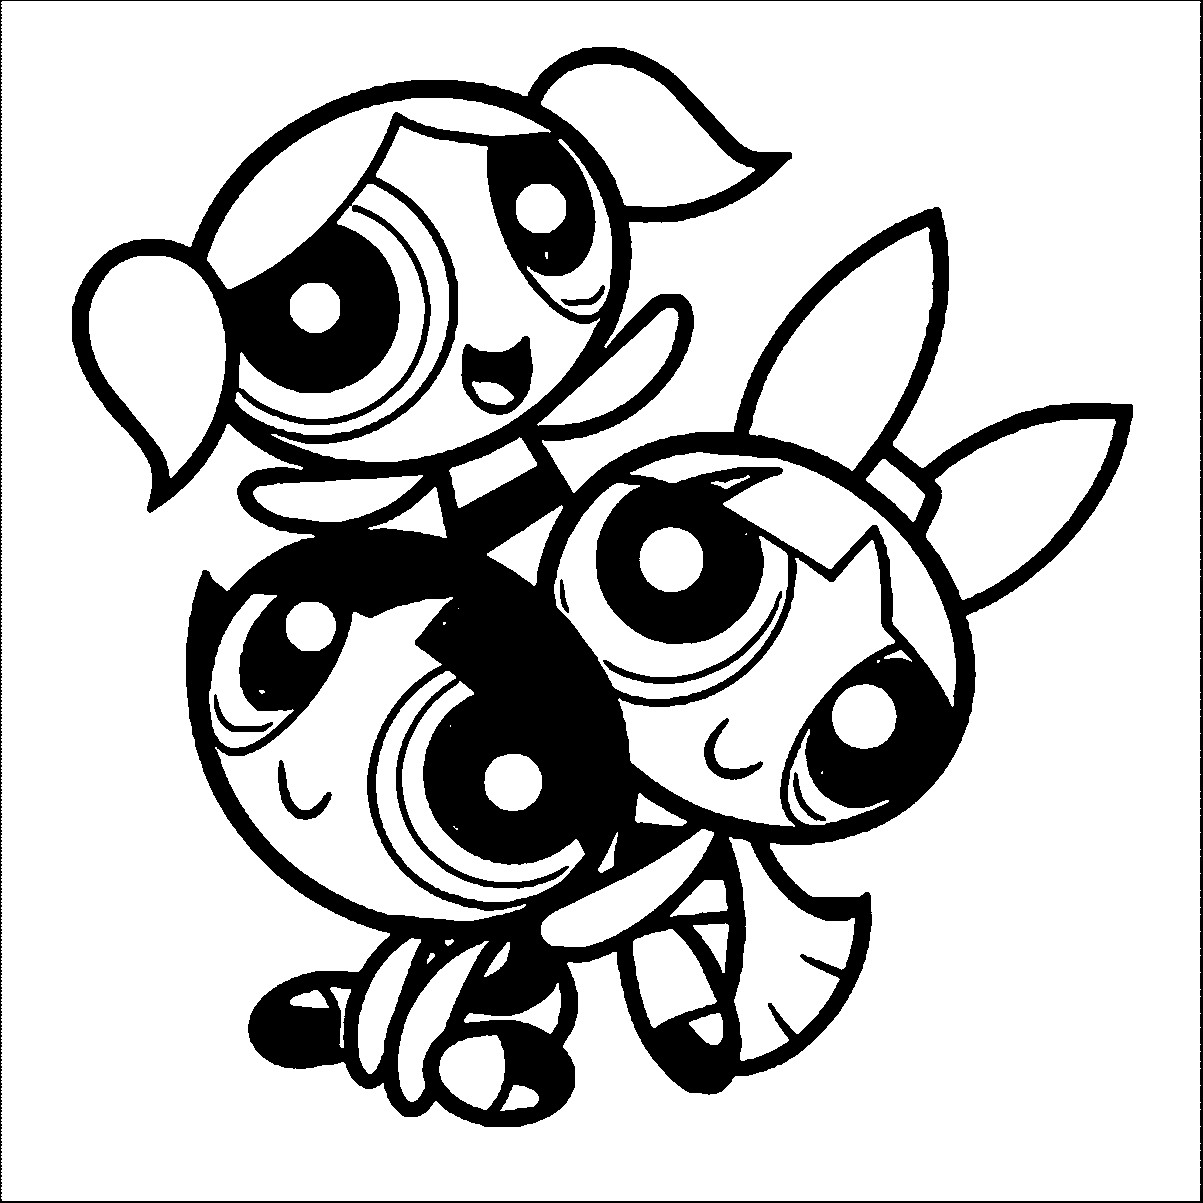 Powerpuff Girls Coloring Book
 Powerpuff Girls Coloring Pages